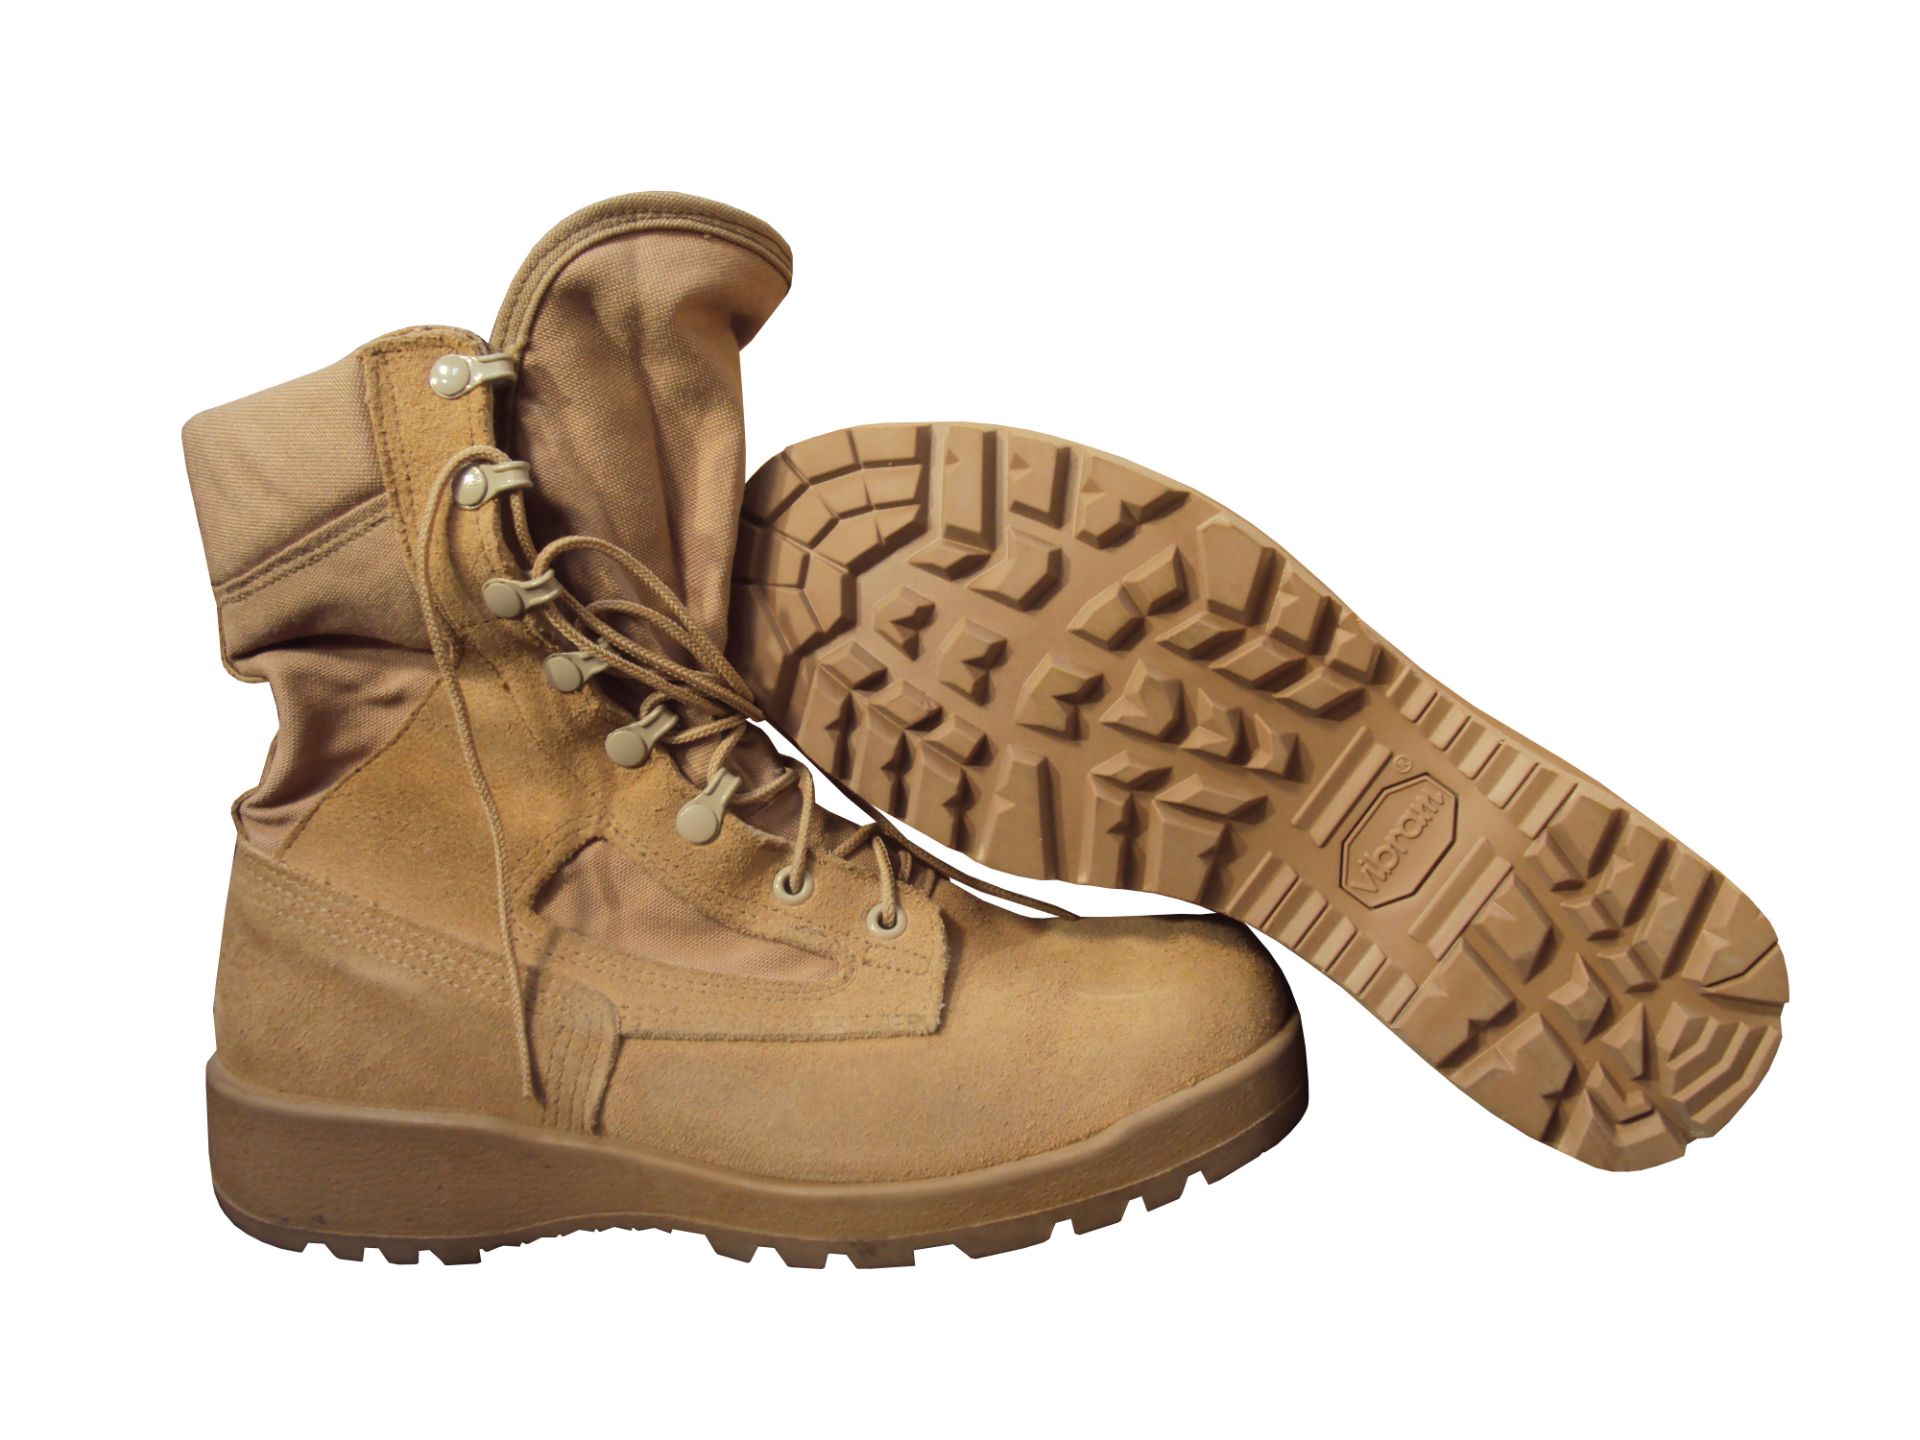 Pack of 15 - Belleville Hot Weather Flight & Combat Vehicle Boots - Brand New